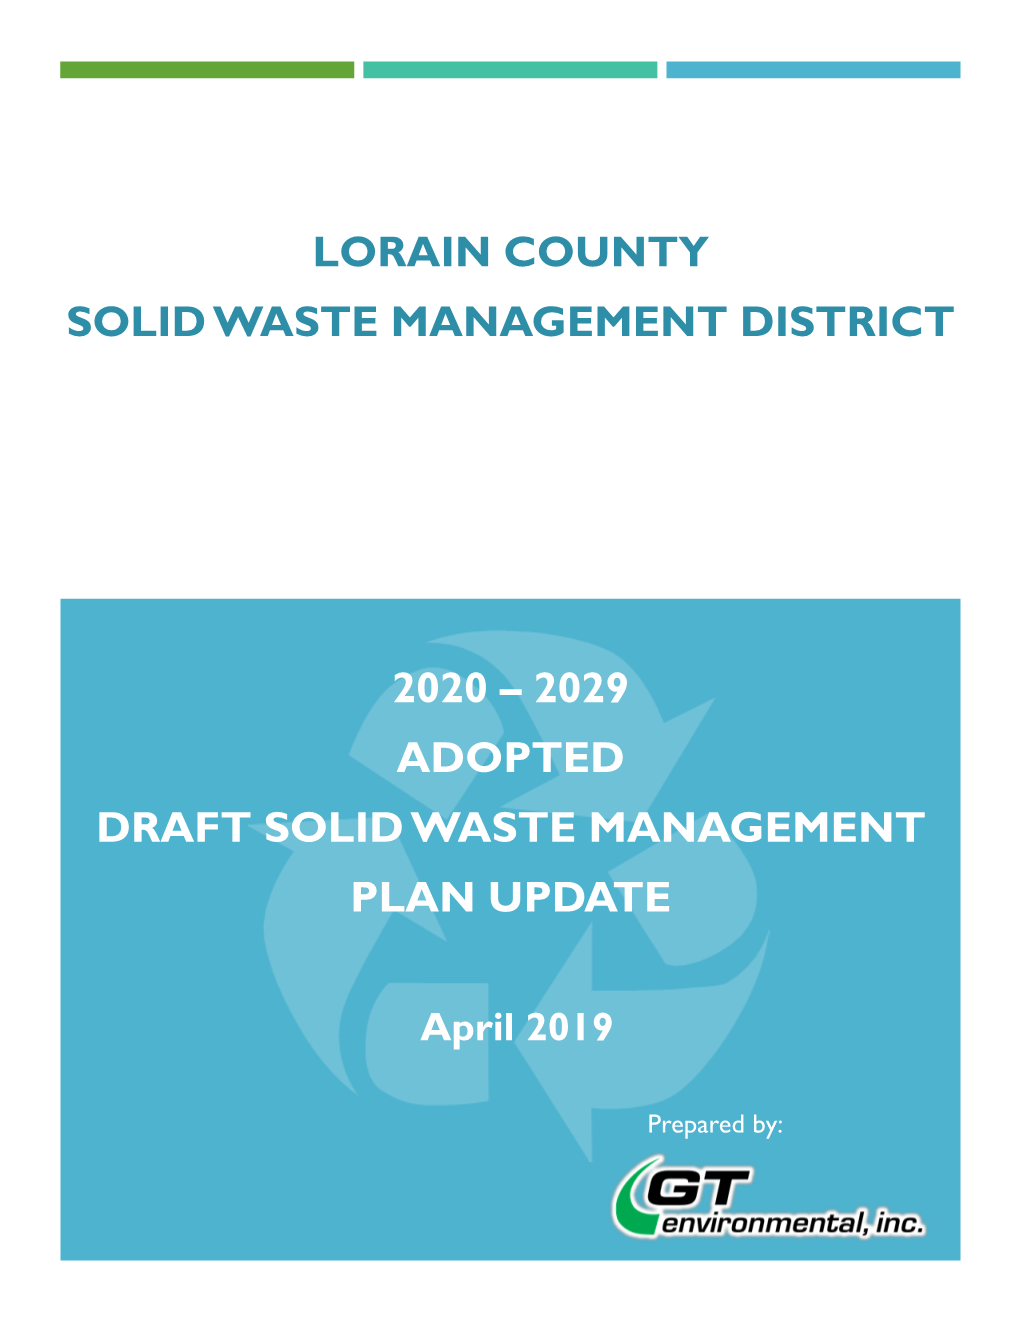 2020 – 2029 Adopted Draft Solid Waste Management Plan Update